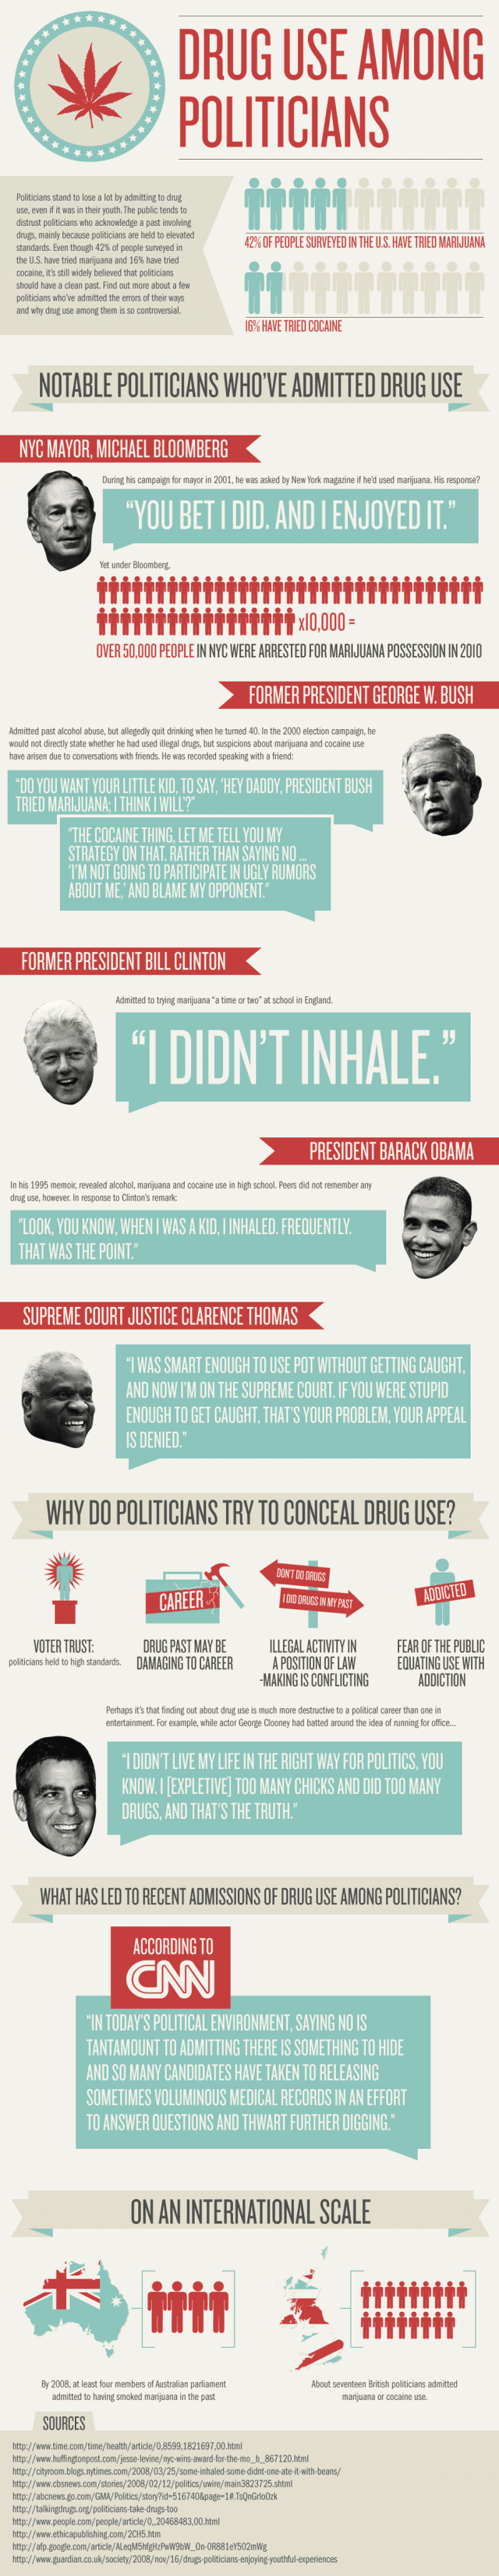 Politicians and Their Drug Use